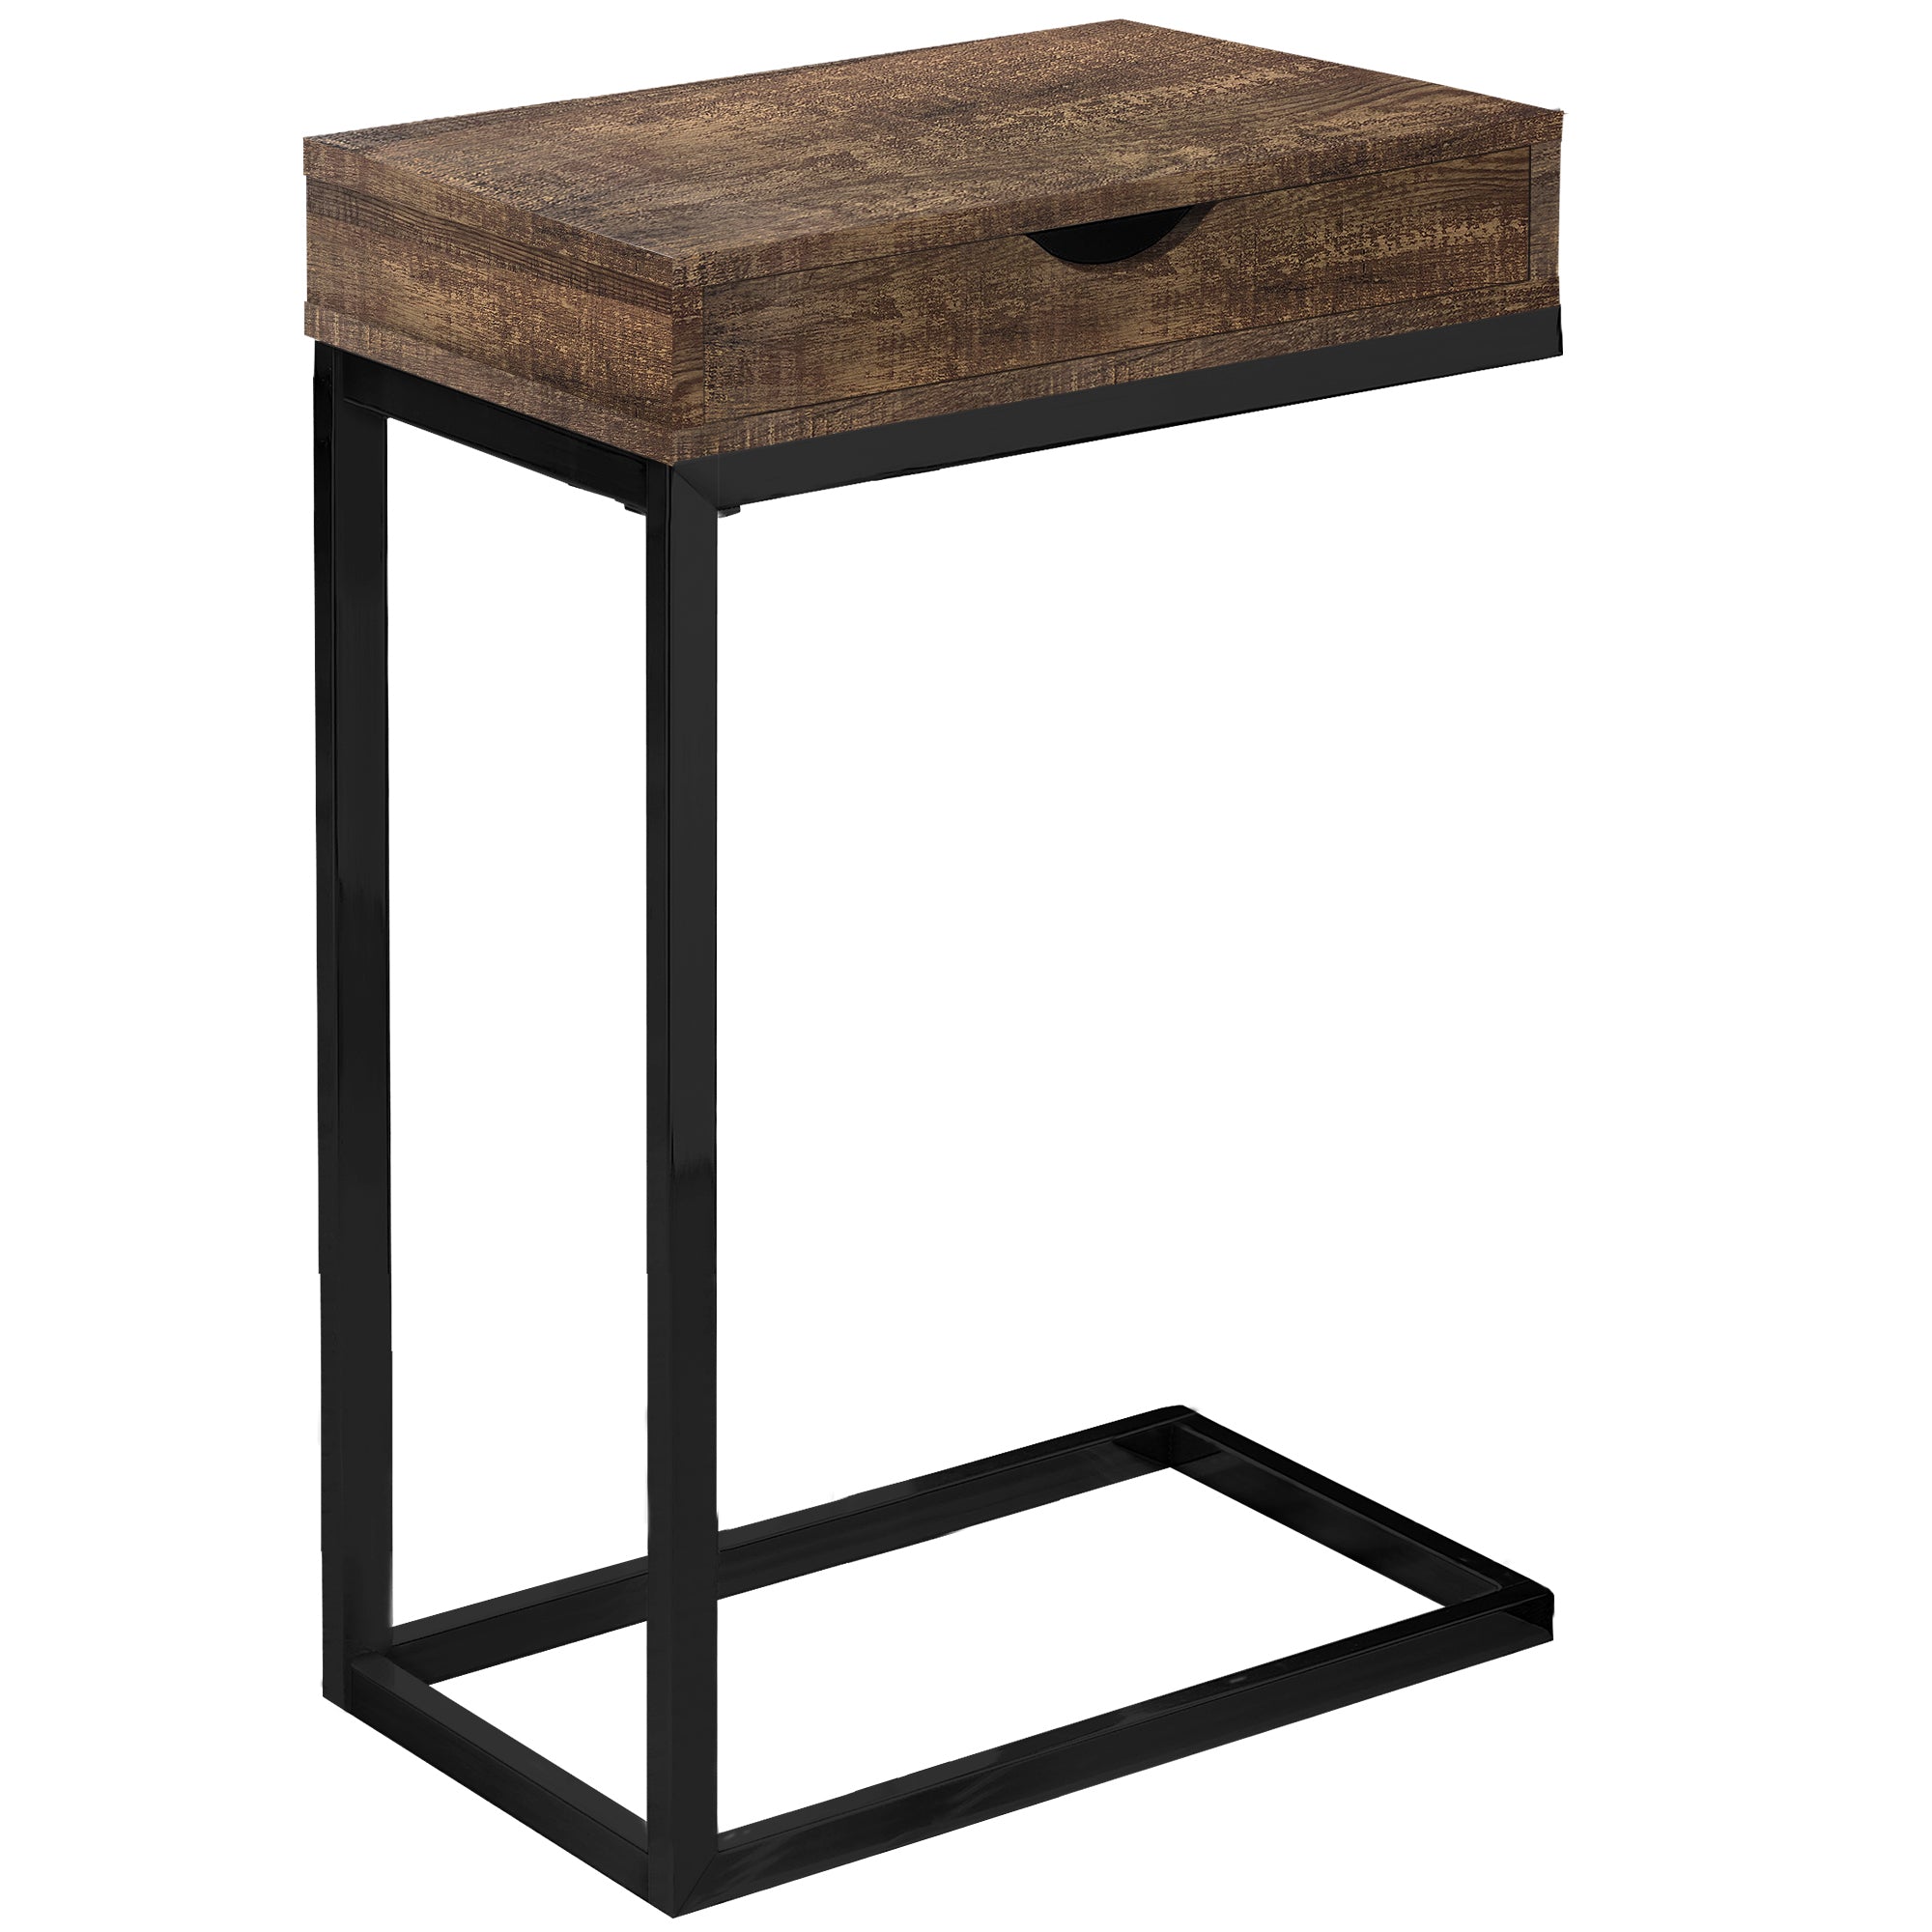 MN-493406    Accent Table, C-Shaped, End, Side, Snack, Living Room, Bedroom, Storage Drawer, Metal Legs, Laminate, Brown Reclaimed Wood Look, Black, Contemporary, Modern